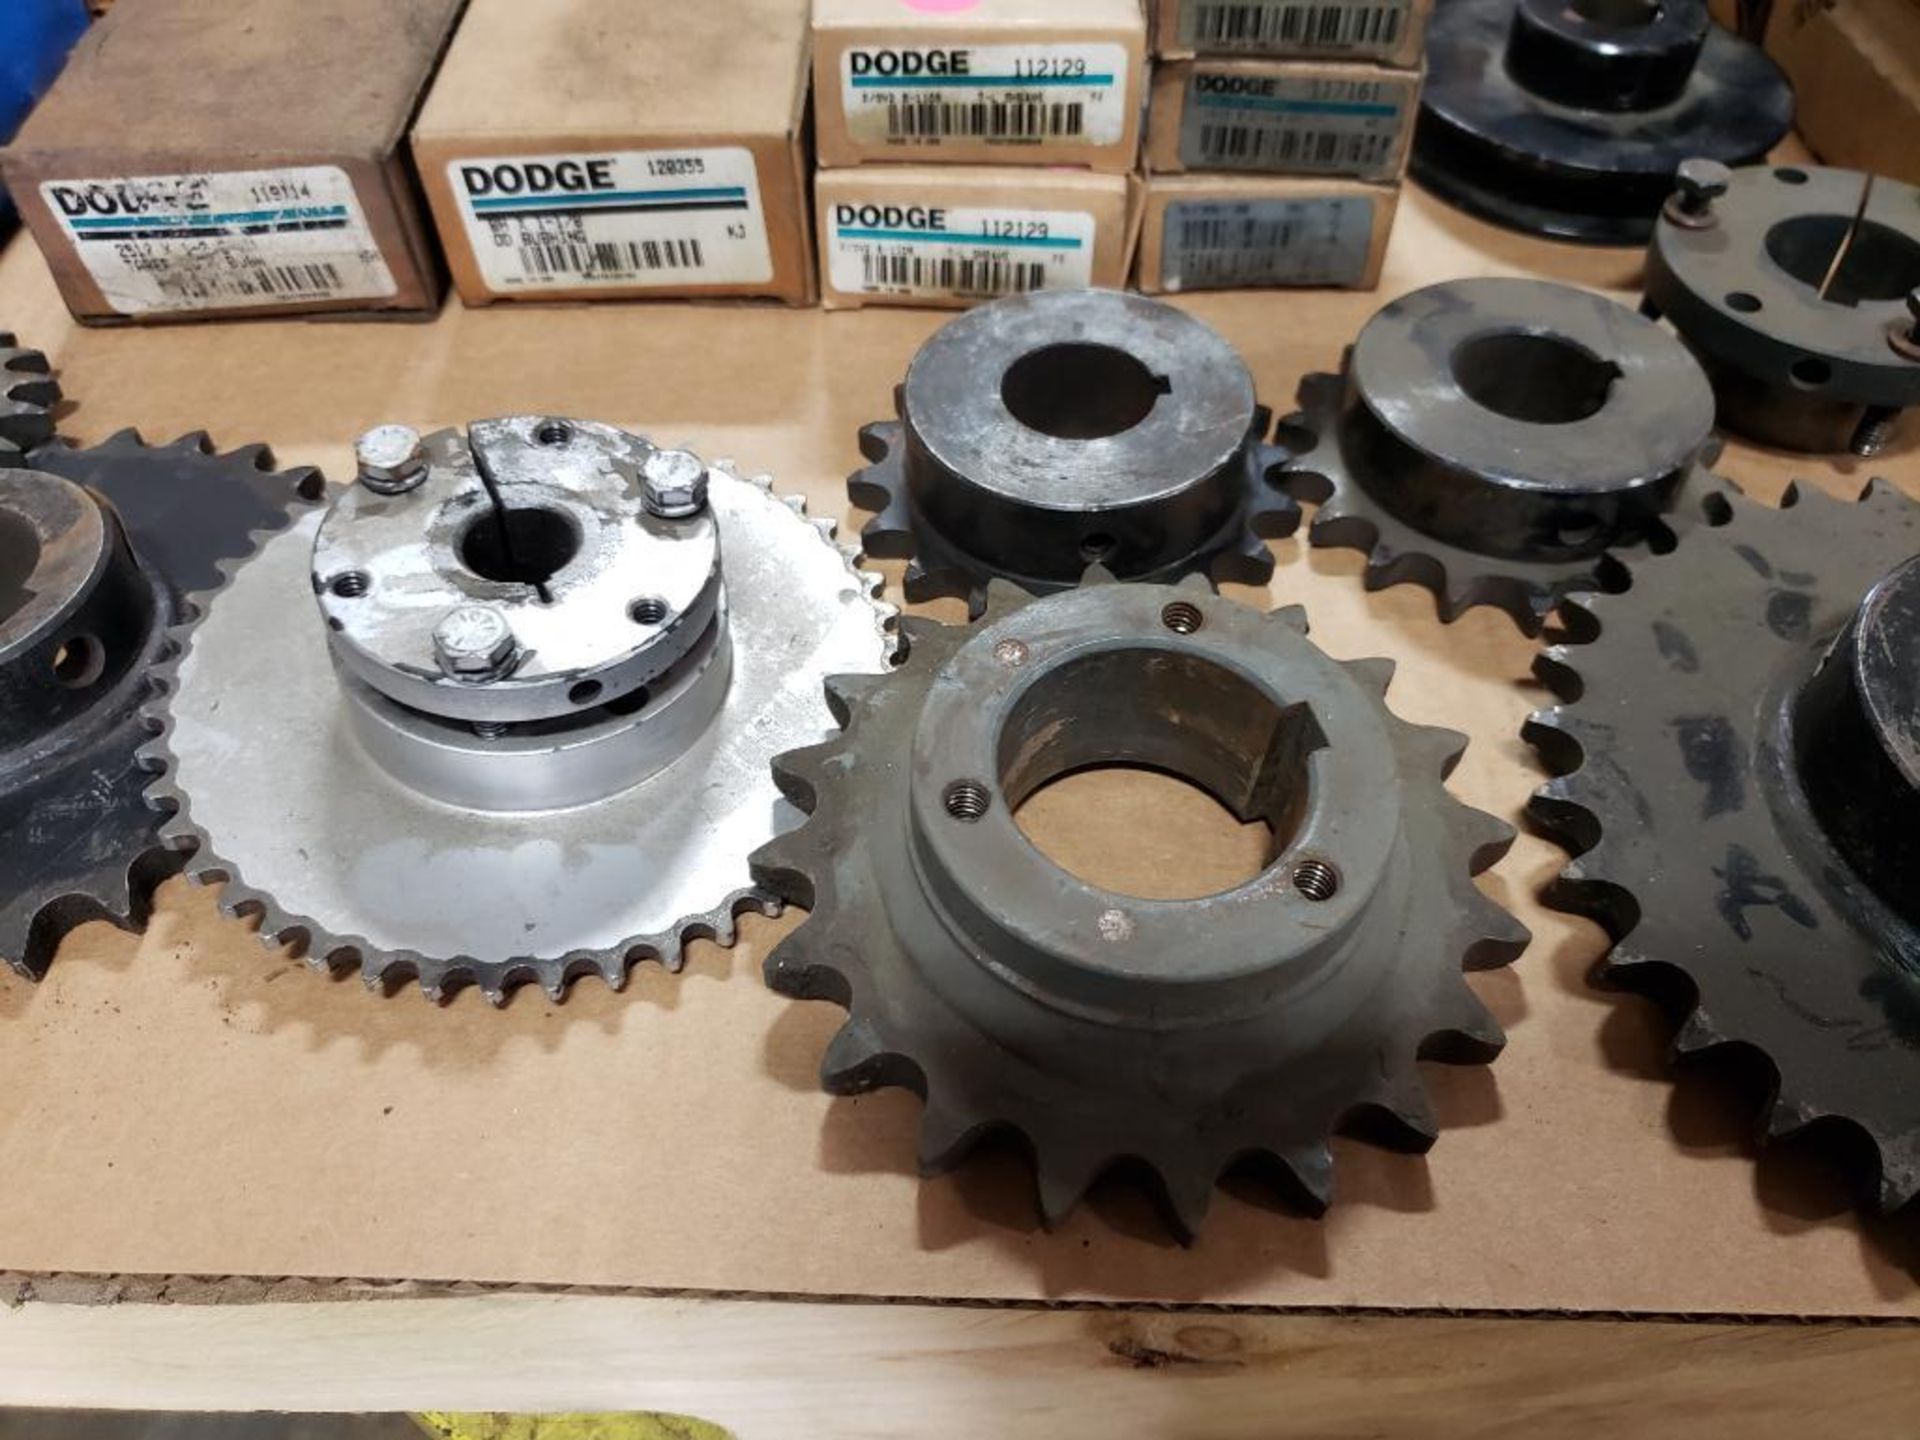 Assorted gears, pullys, and bushings. TB Woods, Dodge, Martin. - Image 11 of 13